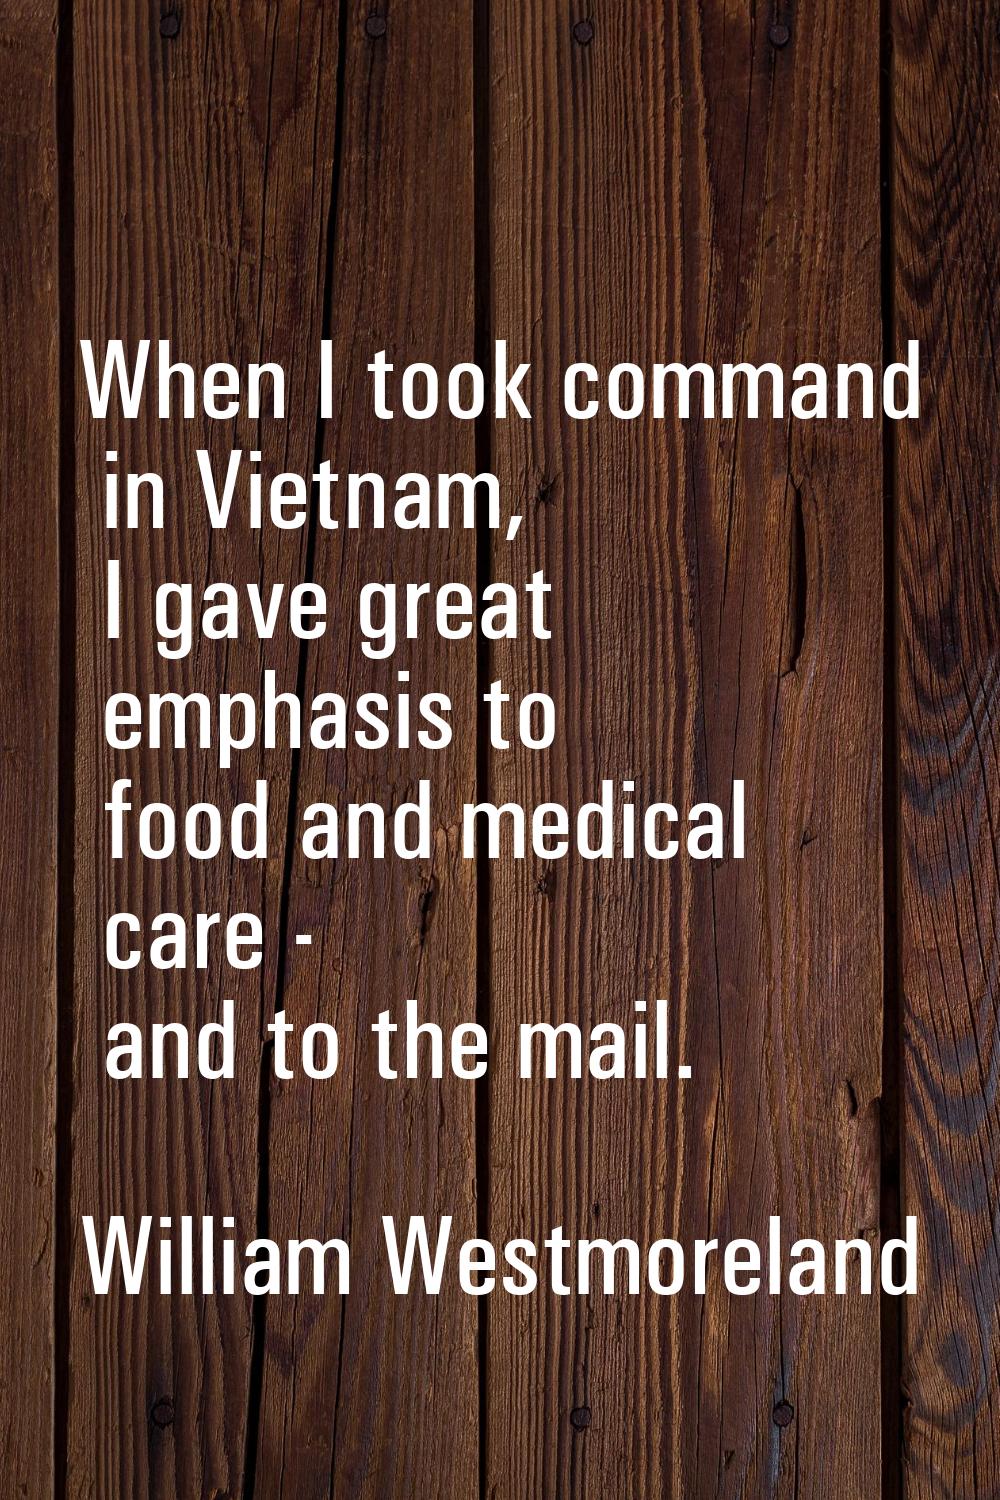 When I took command in Vietnam, I gave great emphasis to food and medical care - and to the mail.